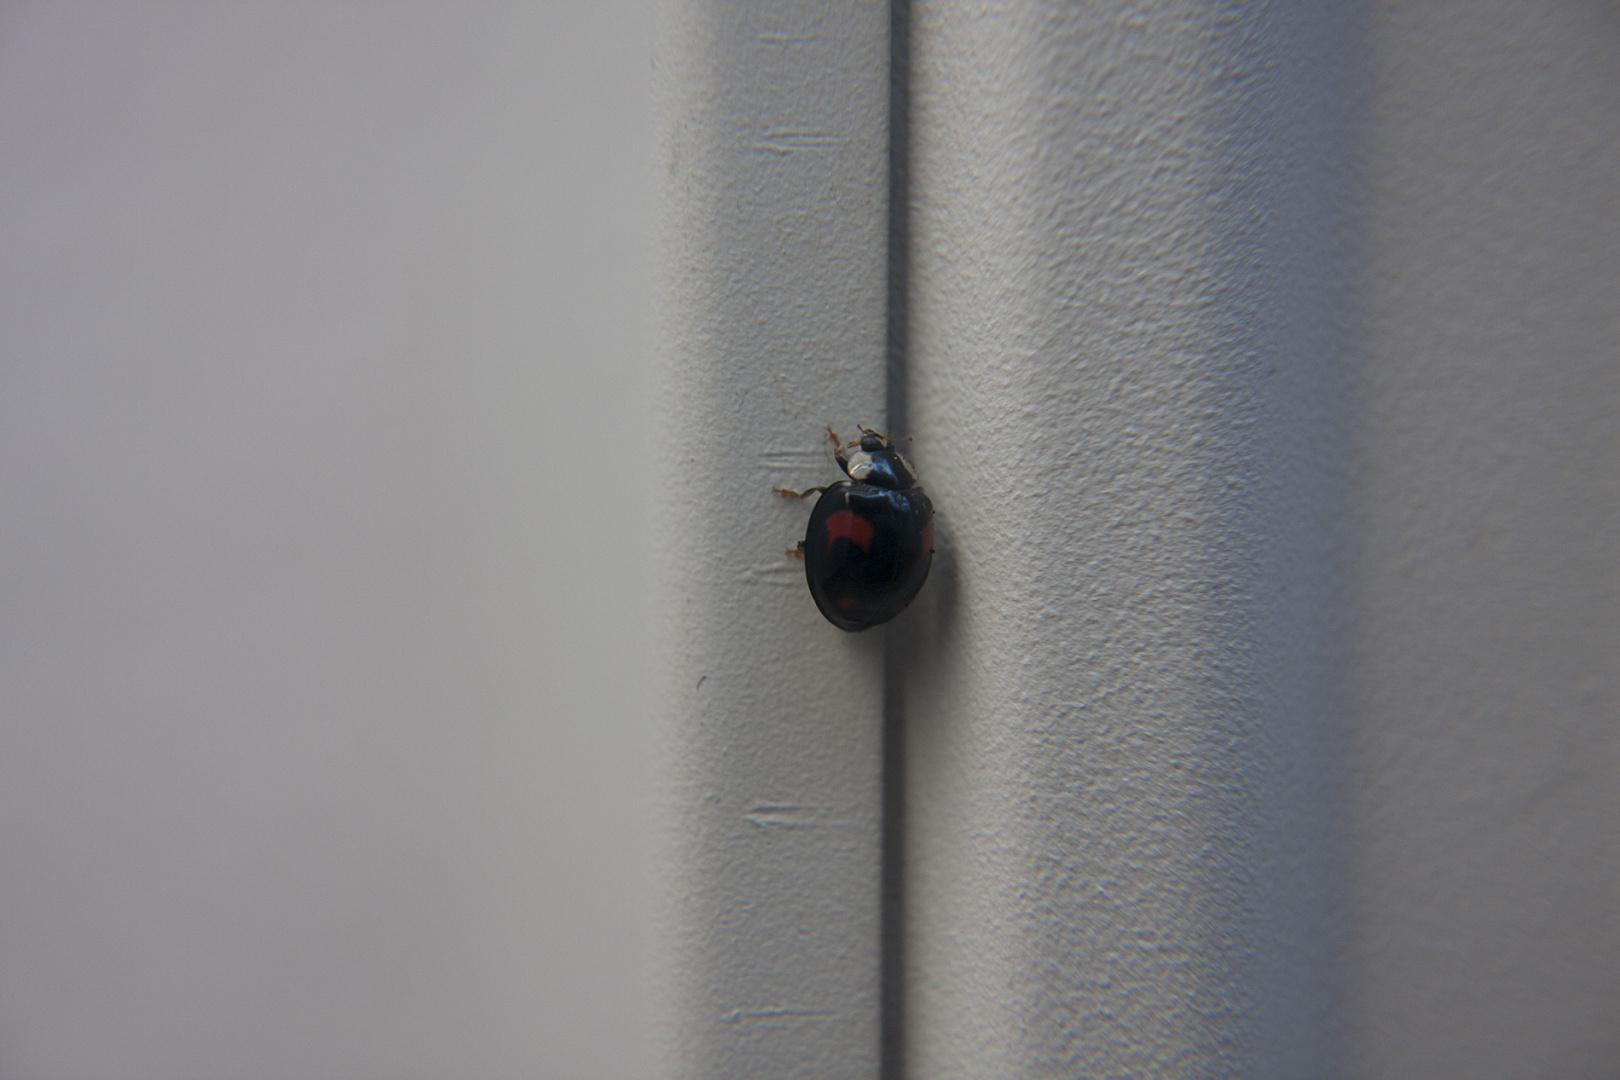 a small ladybird during a rainy day